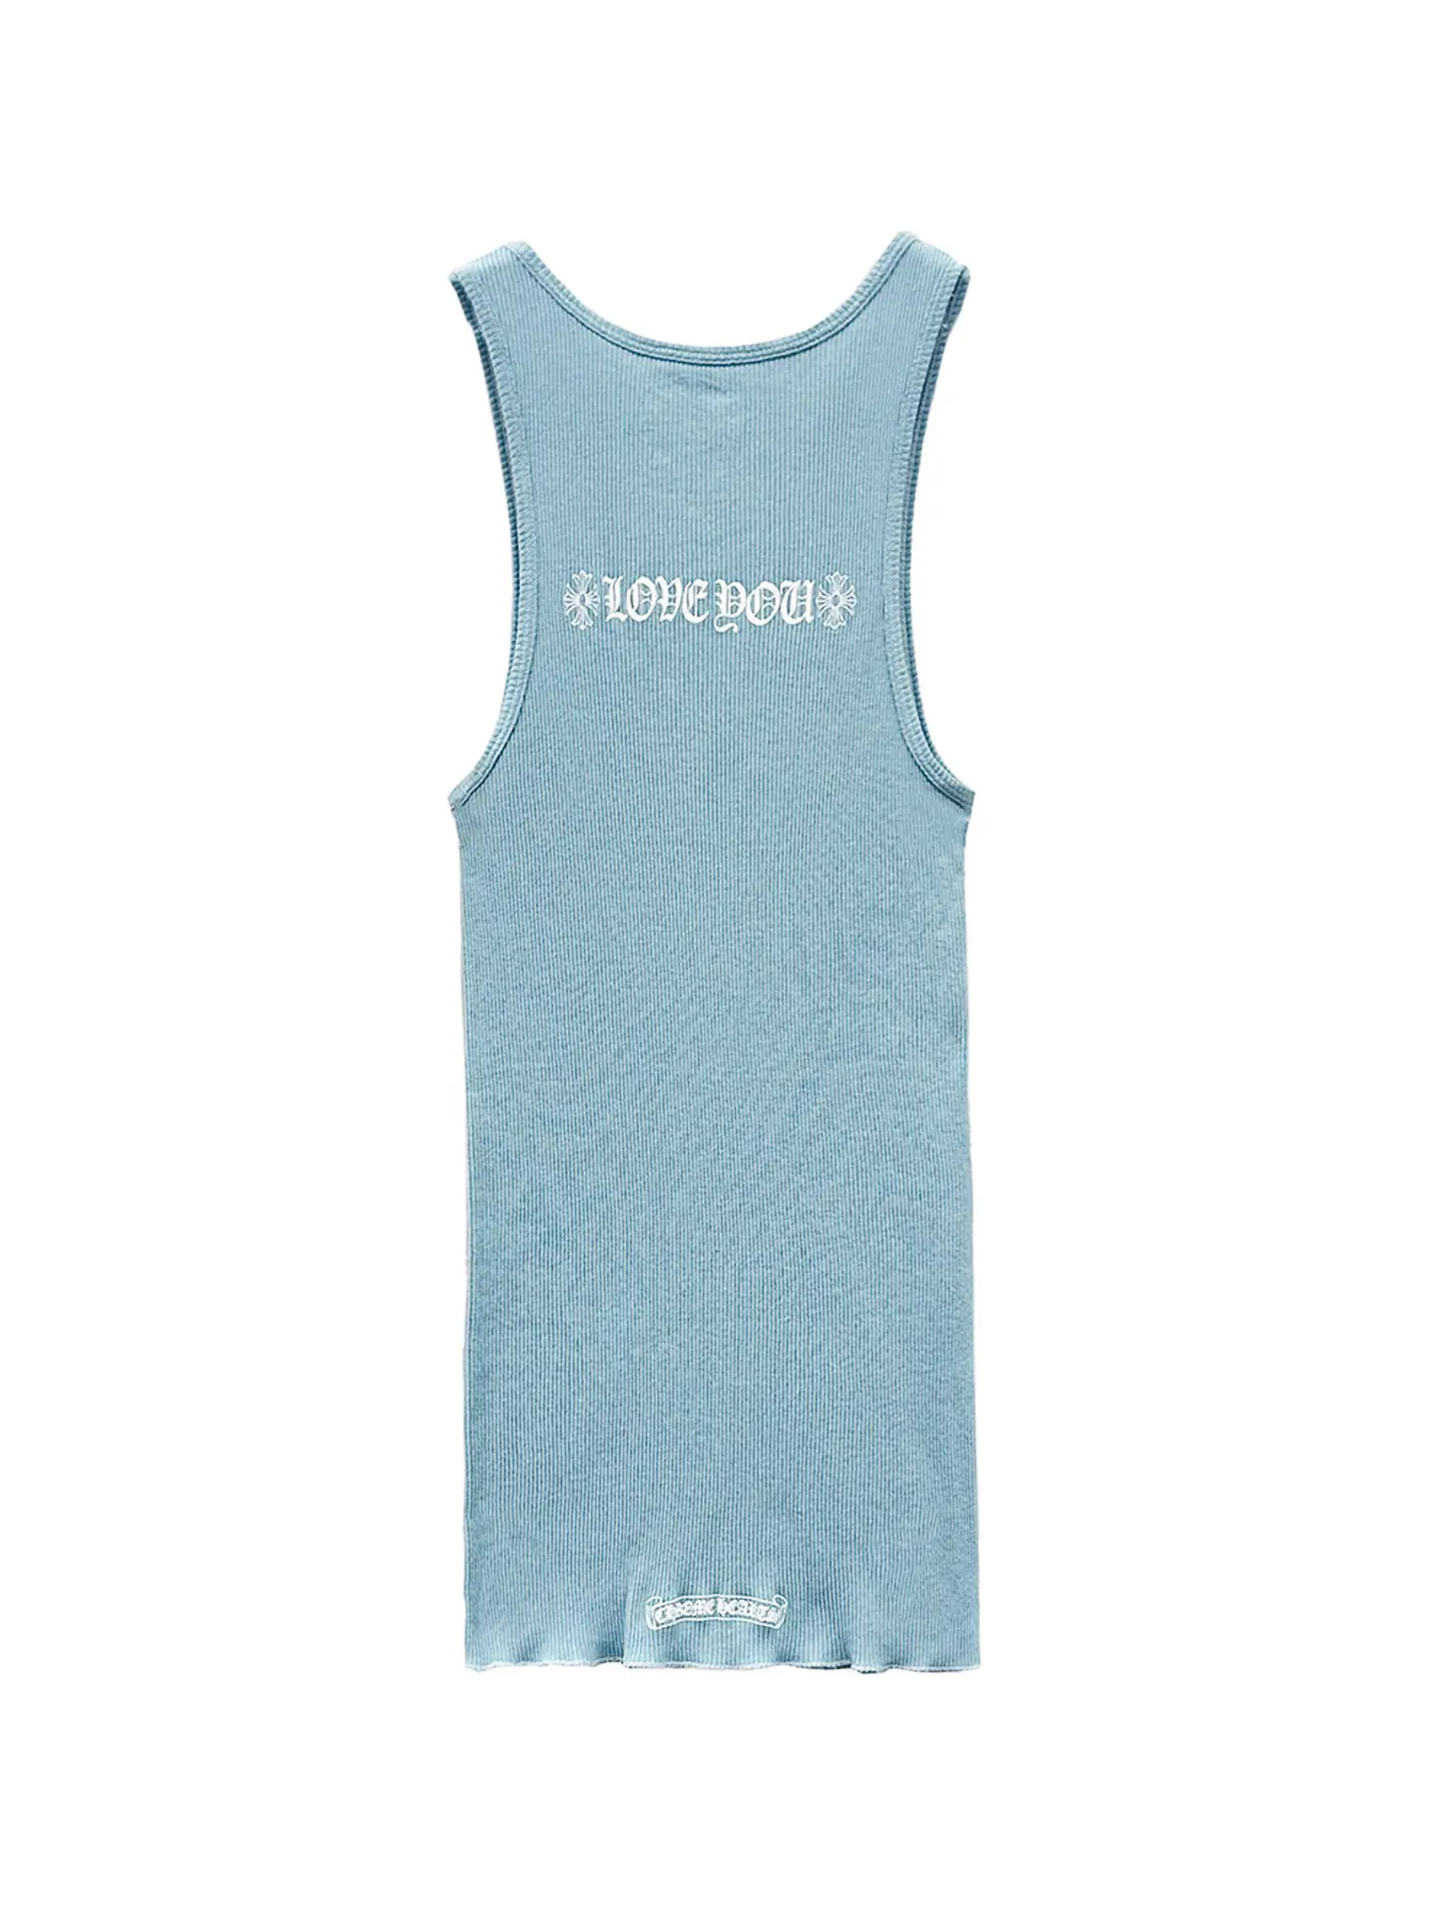 Chrome Hearts Love You Tank Top Baby Blue